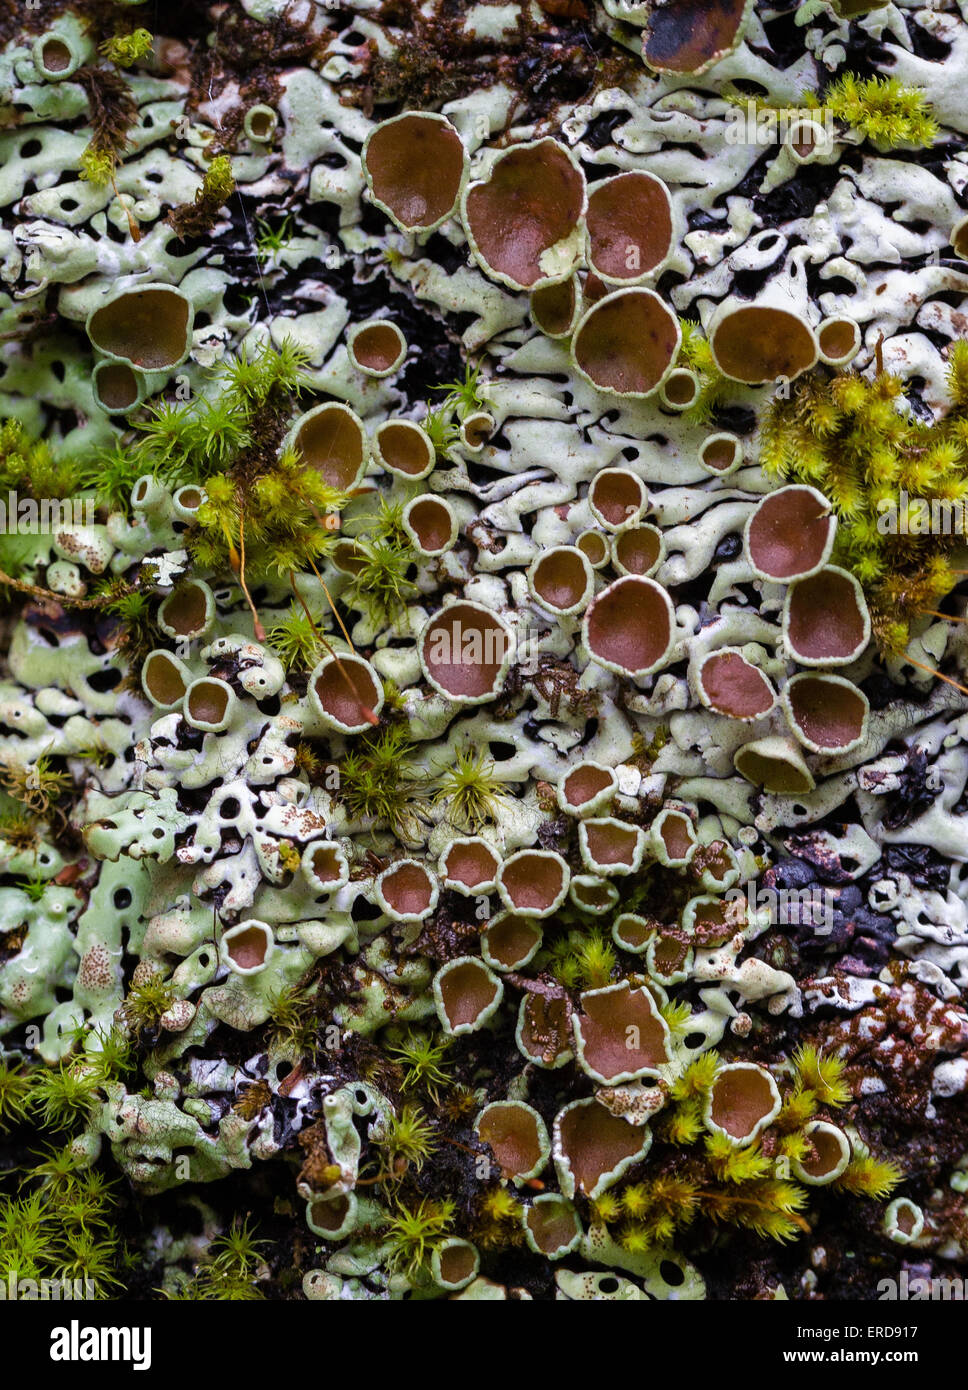 Crustose cup lichen with brown fruiting bodies growing on a tree trunk in central North Island New Zealand Stock Photo